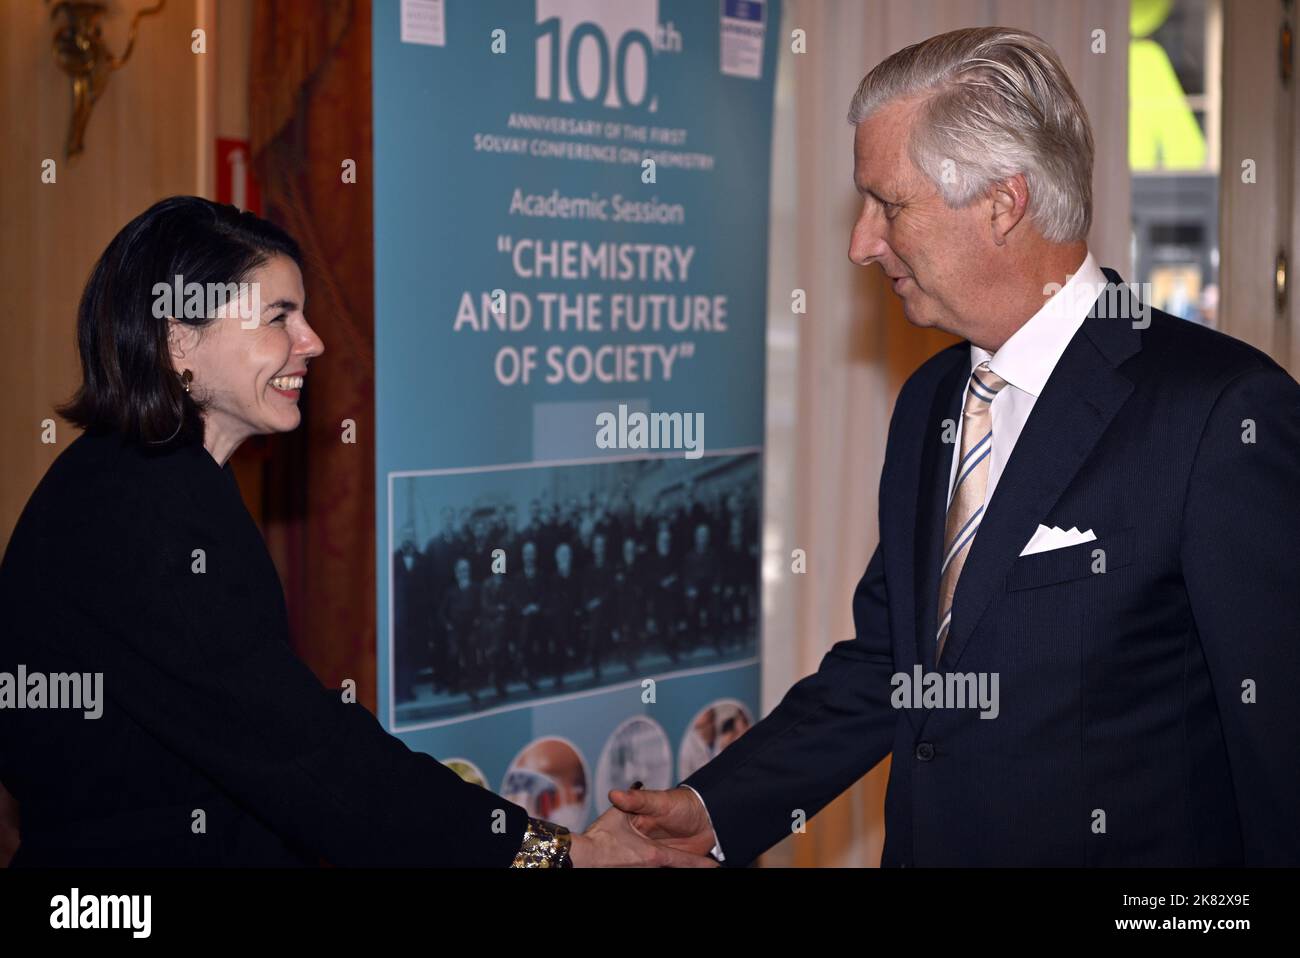 Minister of Higher Education, Social Promotion Education, Scientific Research, University Hospitals, Youth Aide, Promotion of Brussels, Youth and Sports Valerie Glatign and King Philippe - Filip of Belgium pictured during a royal visit to the 100th anniversary of the Solvay Conference of Chemistry, organized by chemical company Solvay, Thursday 20 October 2022 in Brussels. Solvay organizes the 'Chemistry and the Future of Society' academic session for the occasion. BELGA PHOTO ERIC LALMAND Credit: Belga News Agency/Alamy Live News Stock Photo